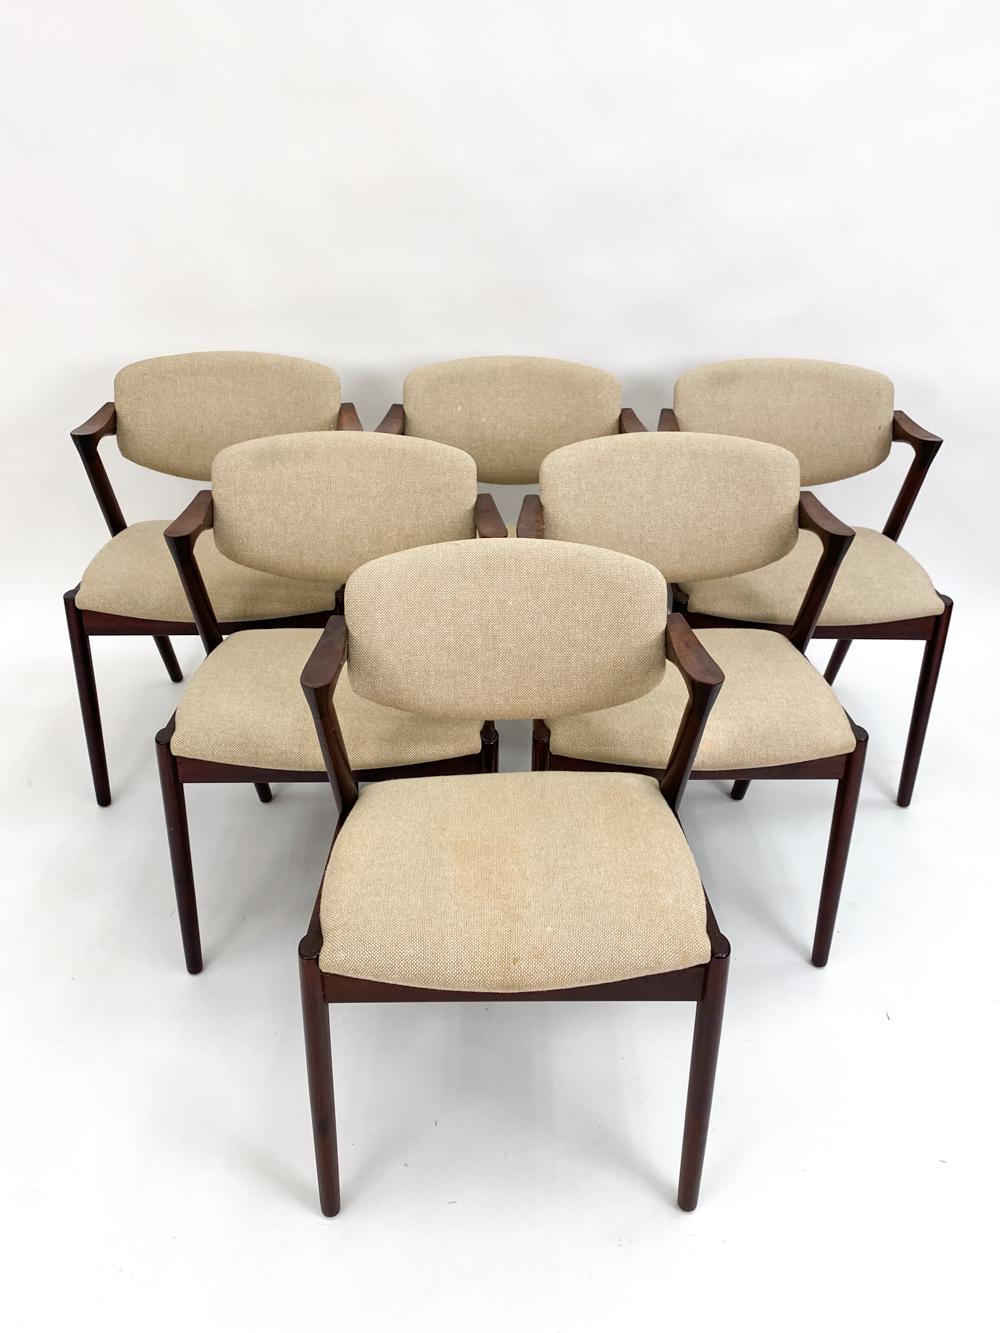 Introduce your living space to the epitome of Danish design mastery with this set of six Model 42 